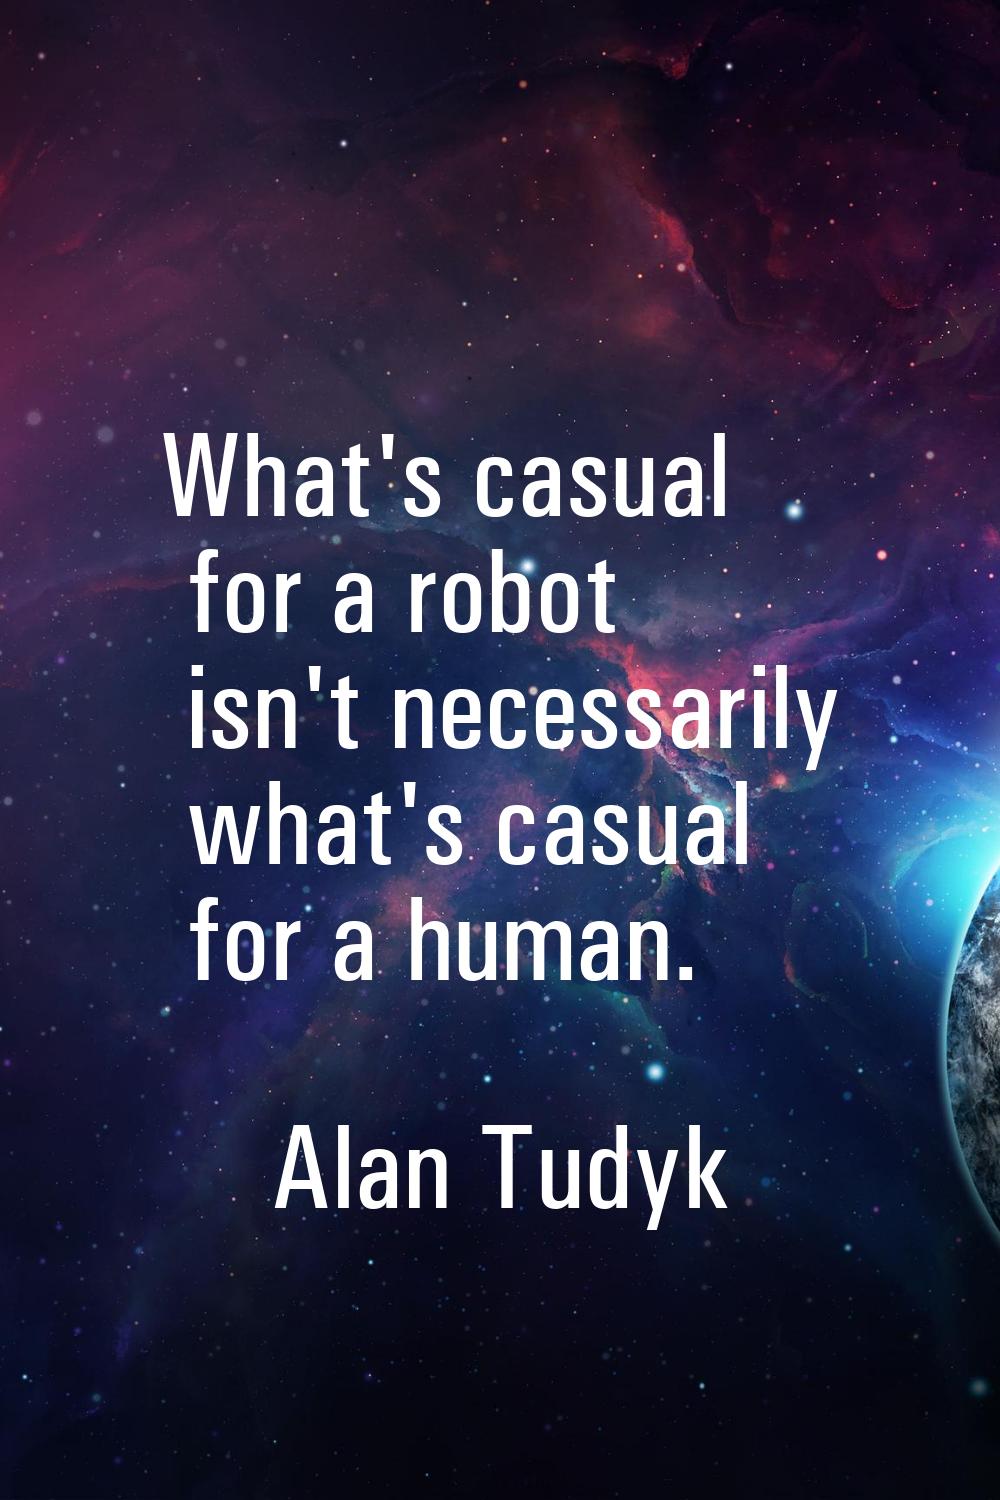 What's casual for a robot isn't necessarily what's casual for a human.